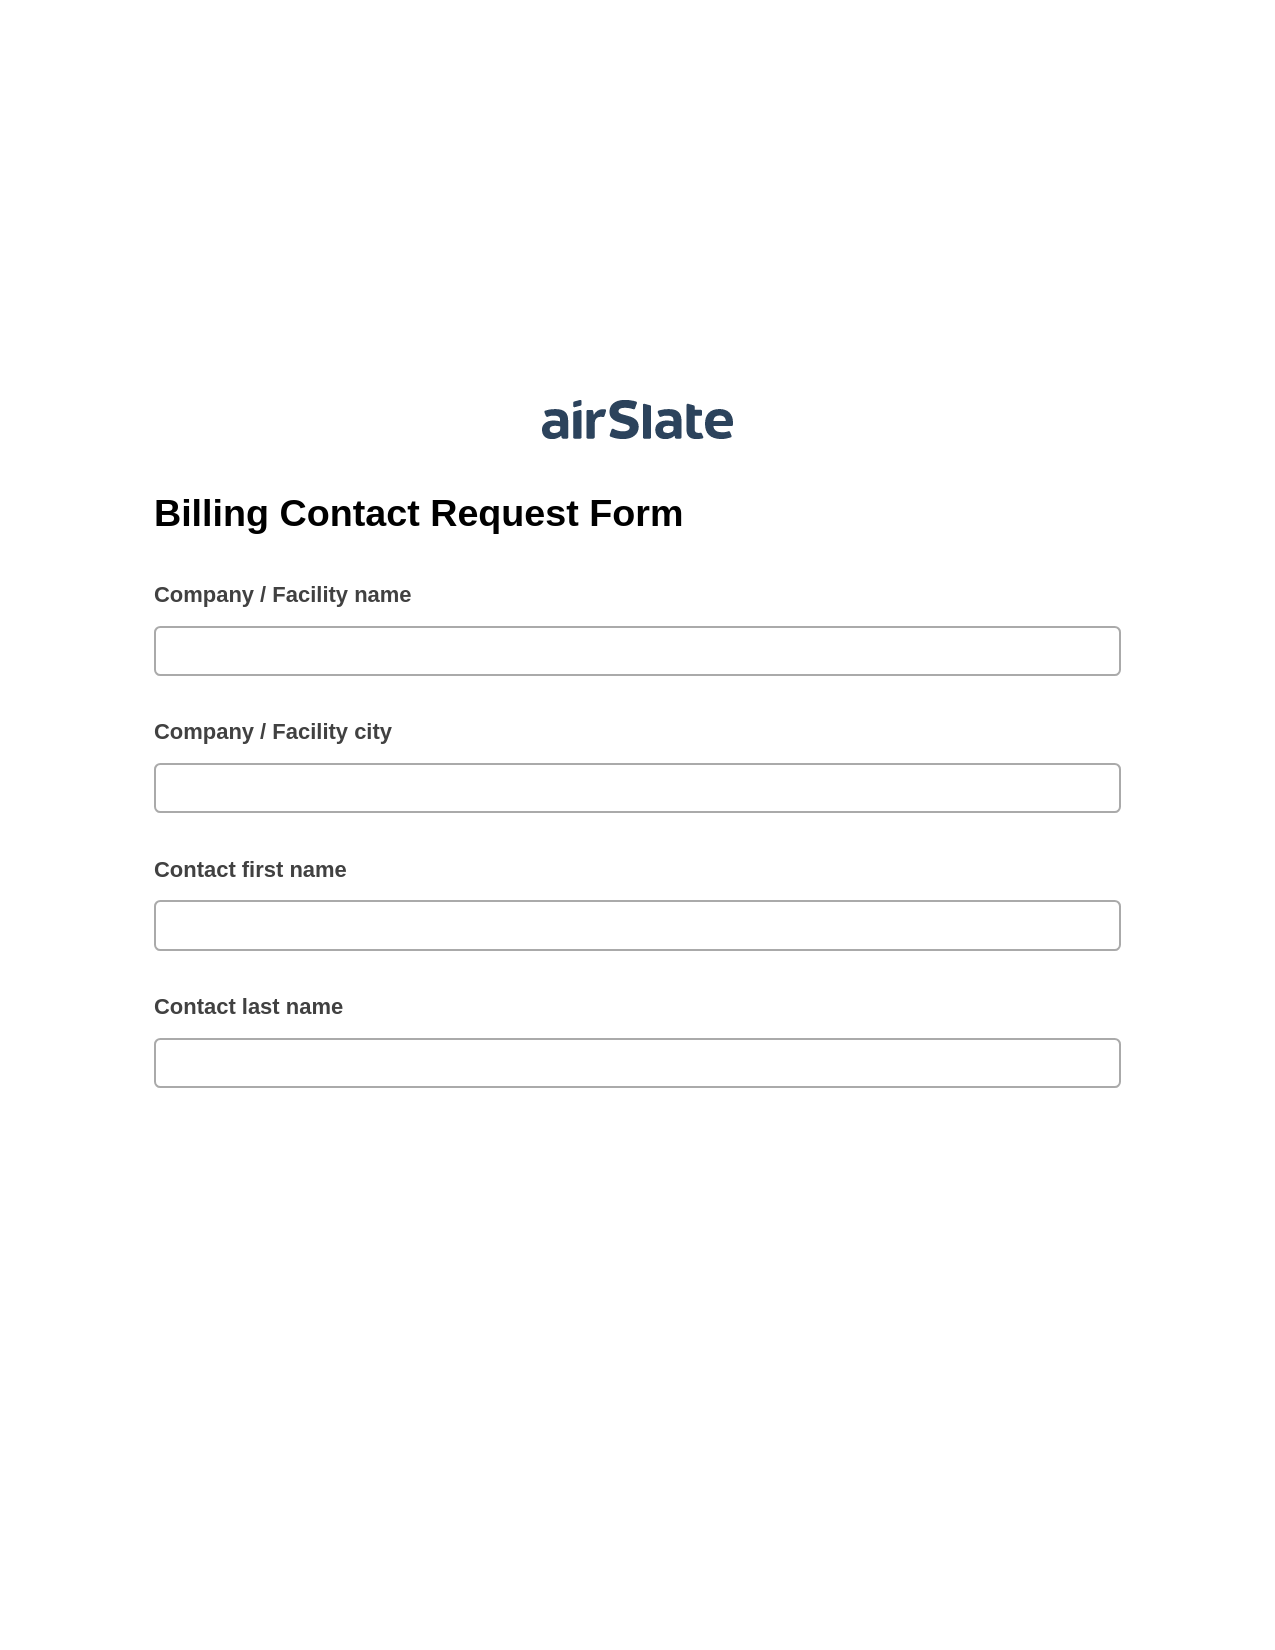 Multirole Billing Contact Request Form Pre-fill Dropdown from Airtable, Create MS Dynamics 365 Records Bot, Archive to SharePoint Folder Bot